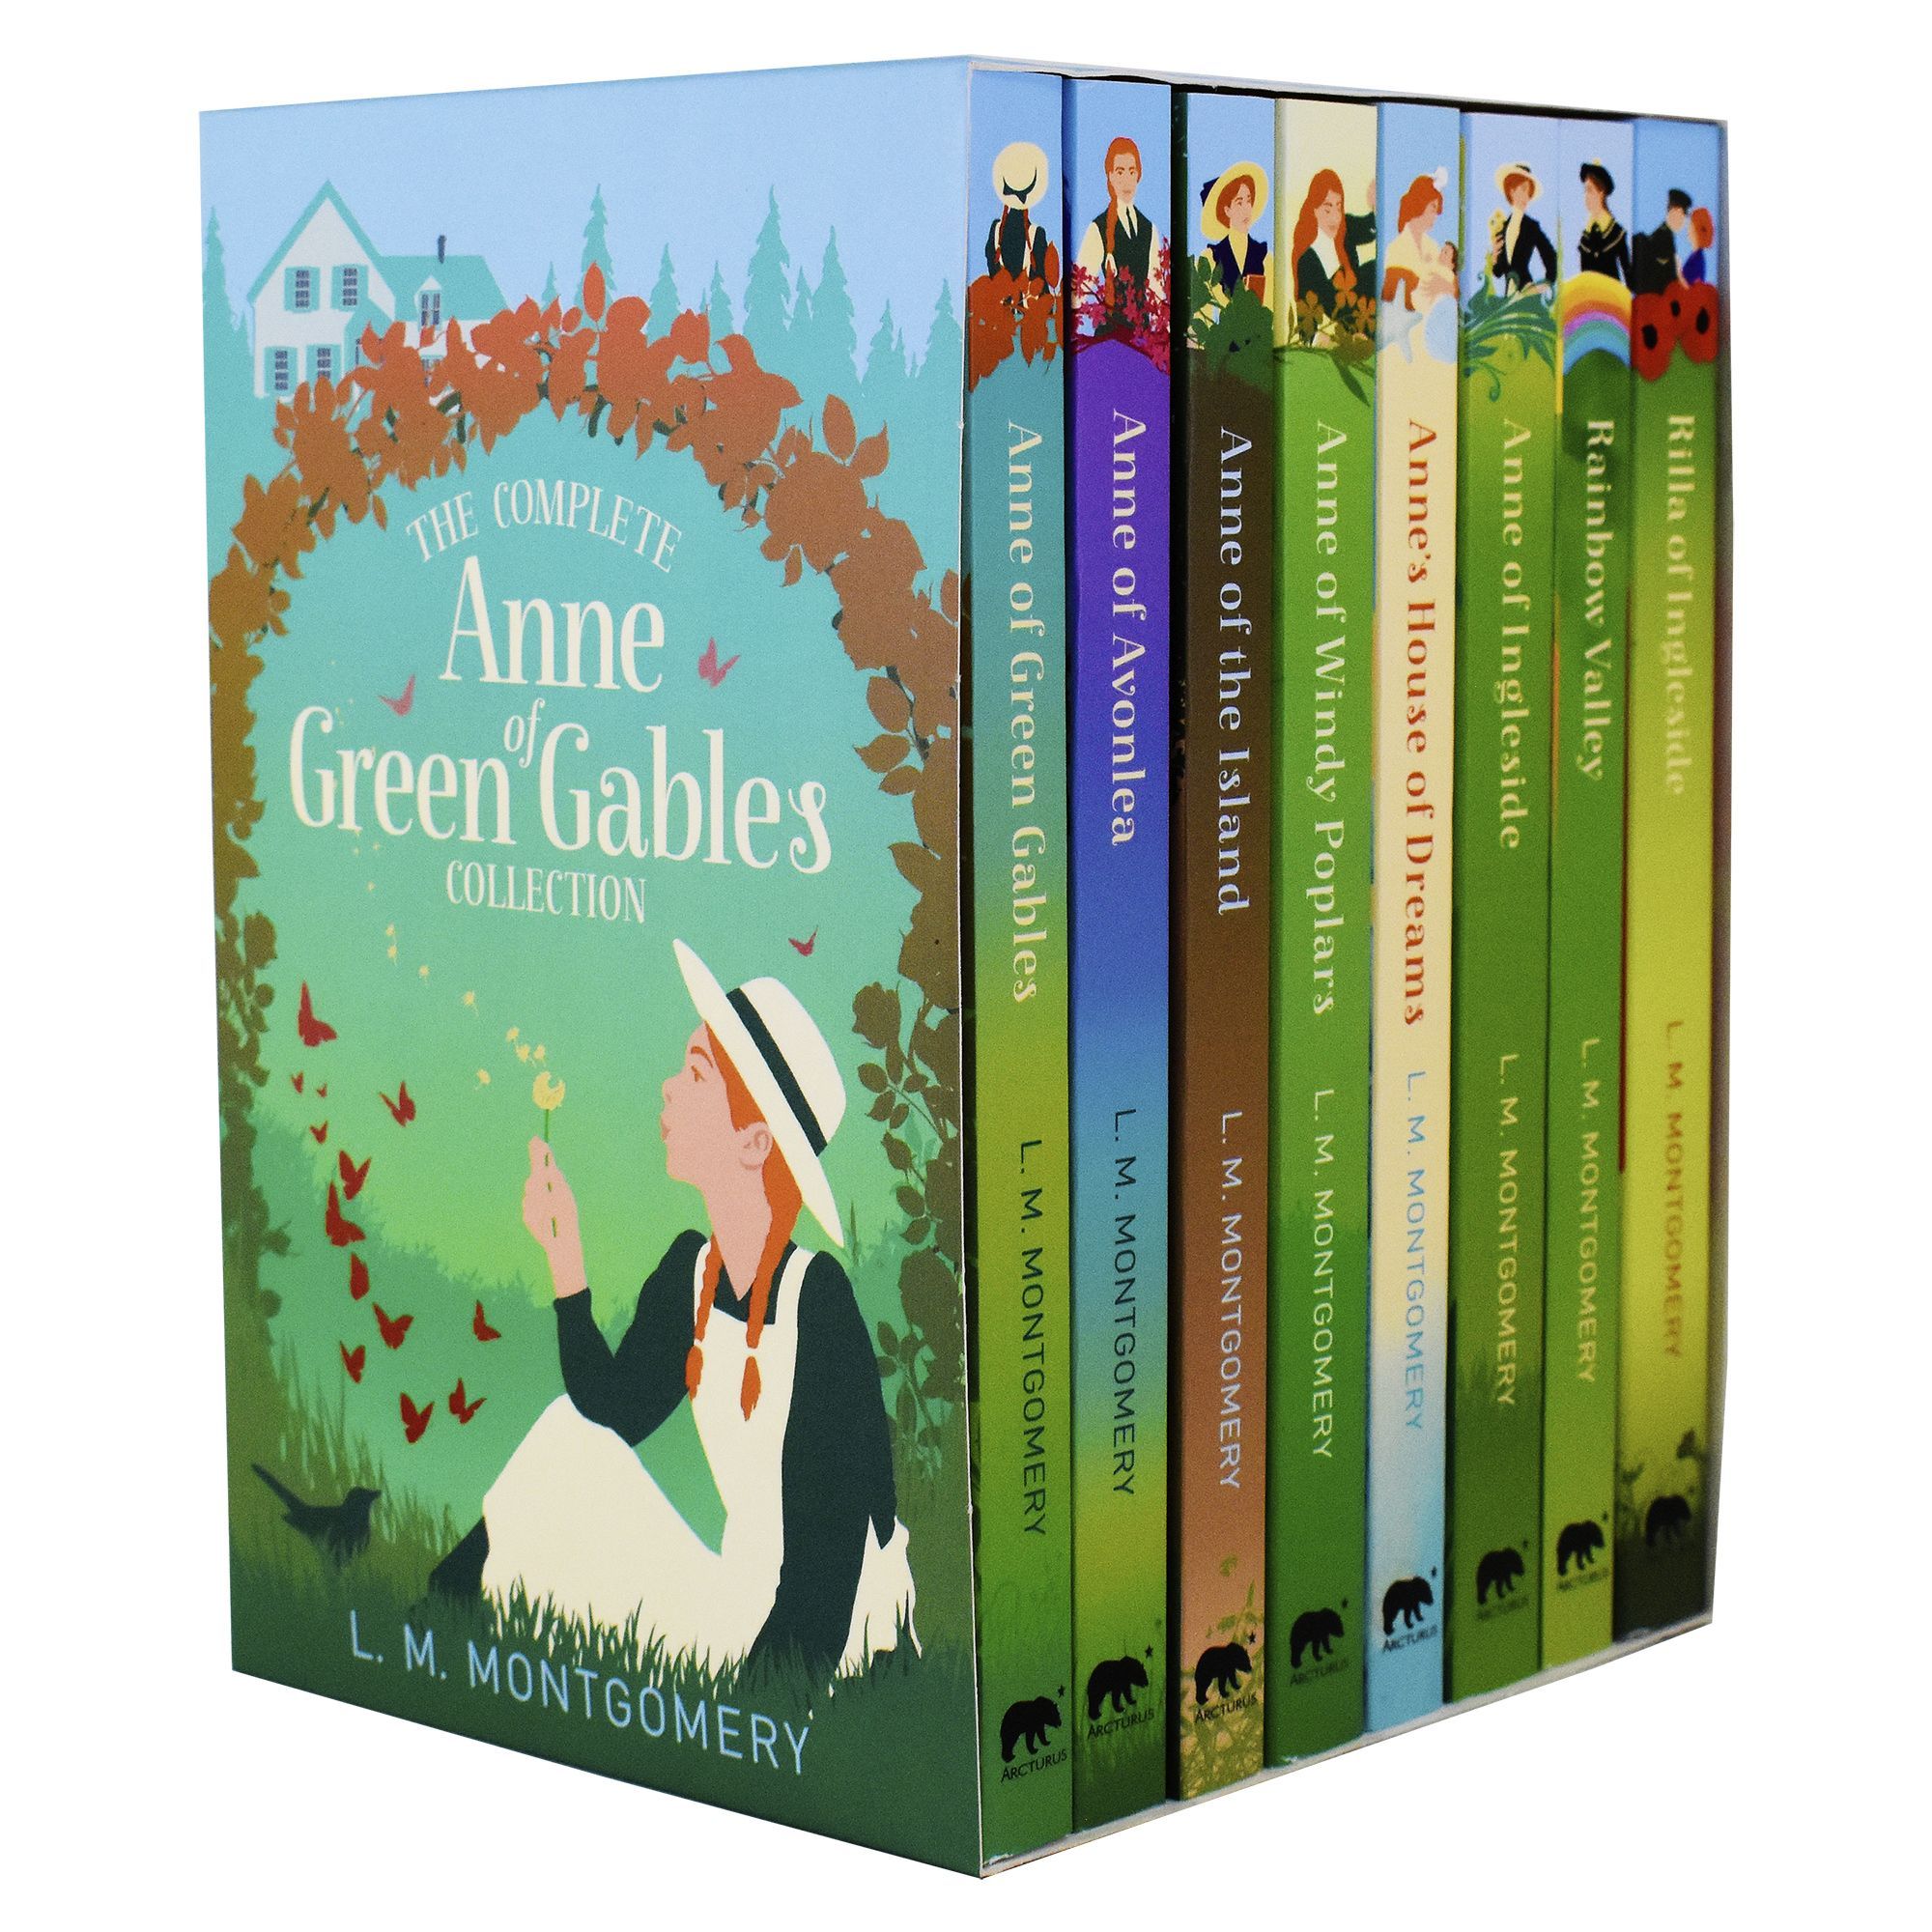 Anne Of Green Gables 8 Books Children Set Box Pack Paperback By L. M. Montgomery - St Stephens Books